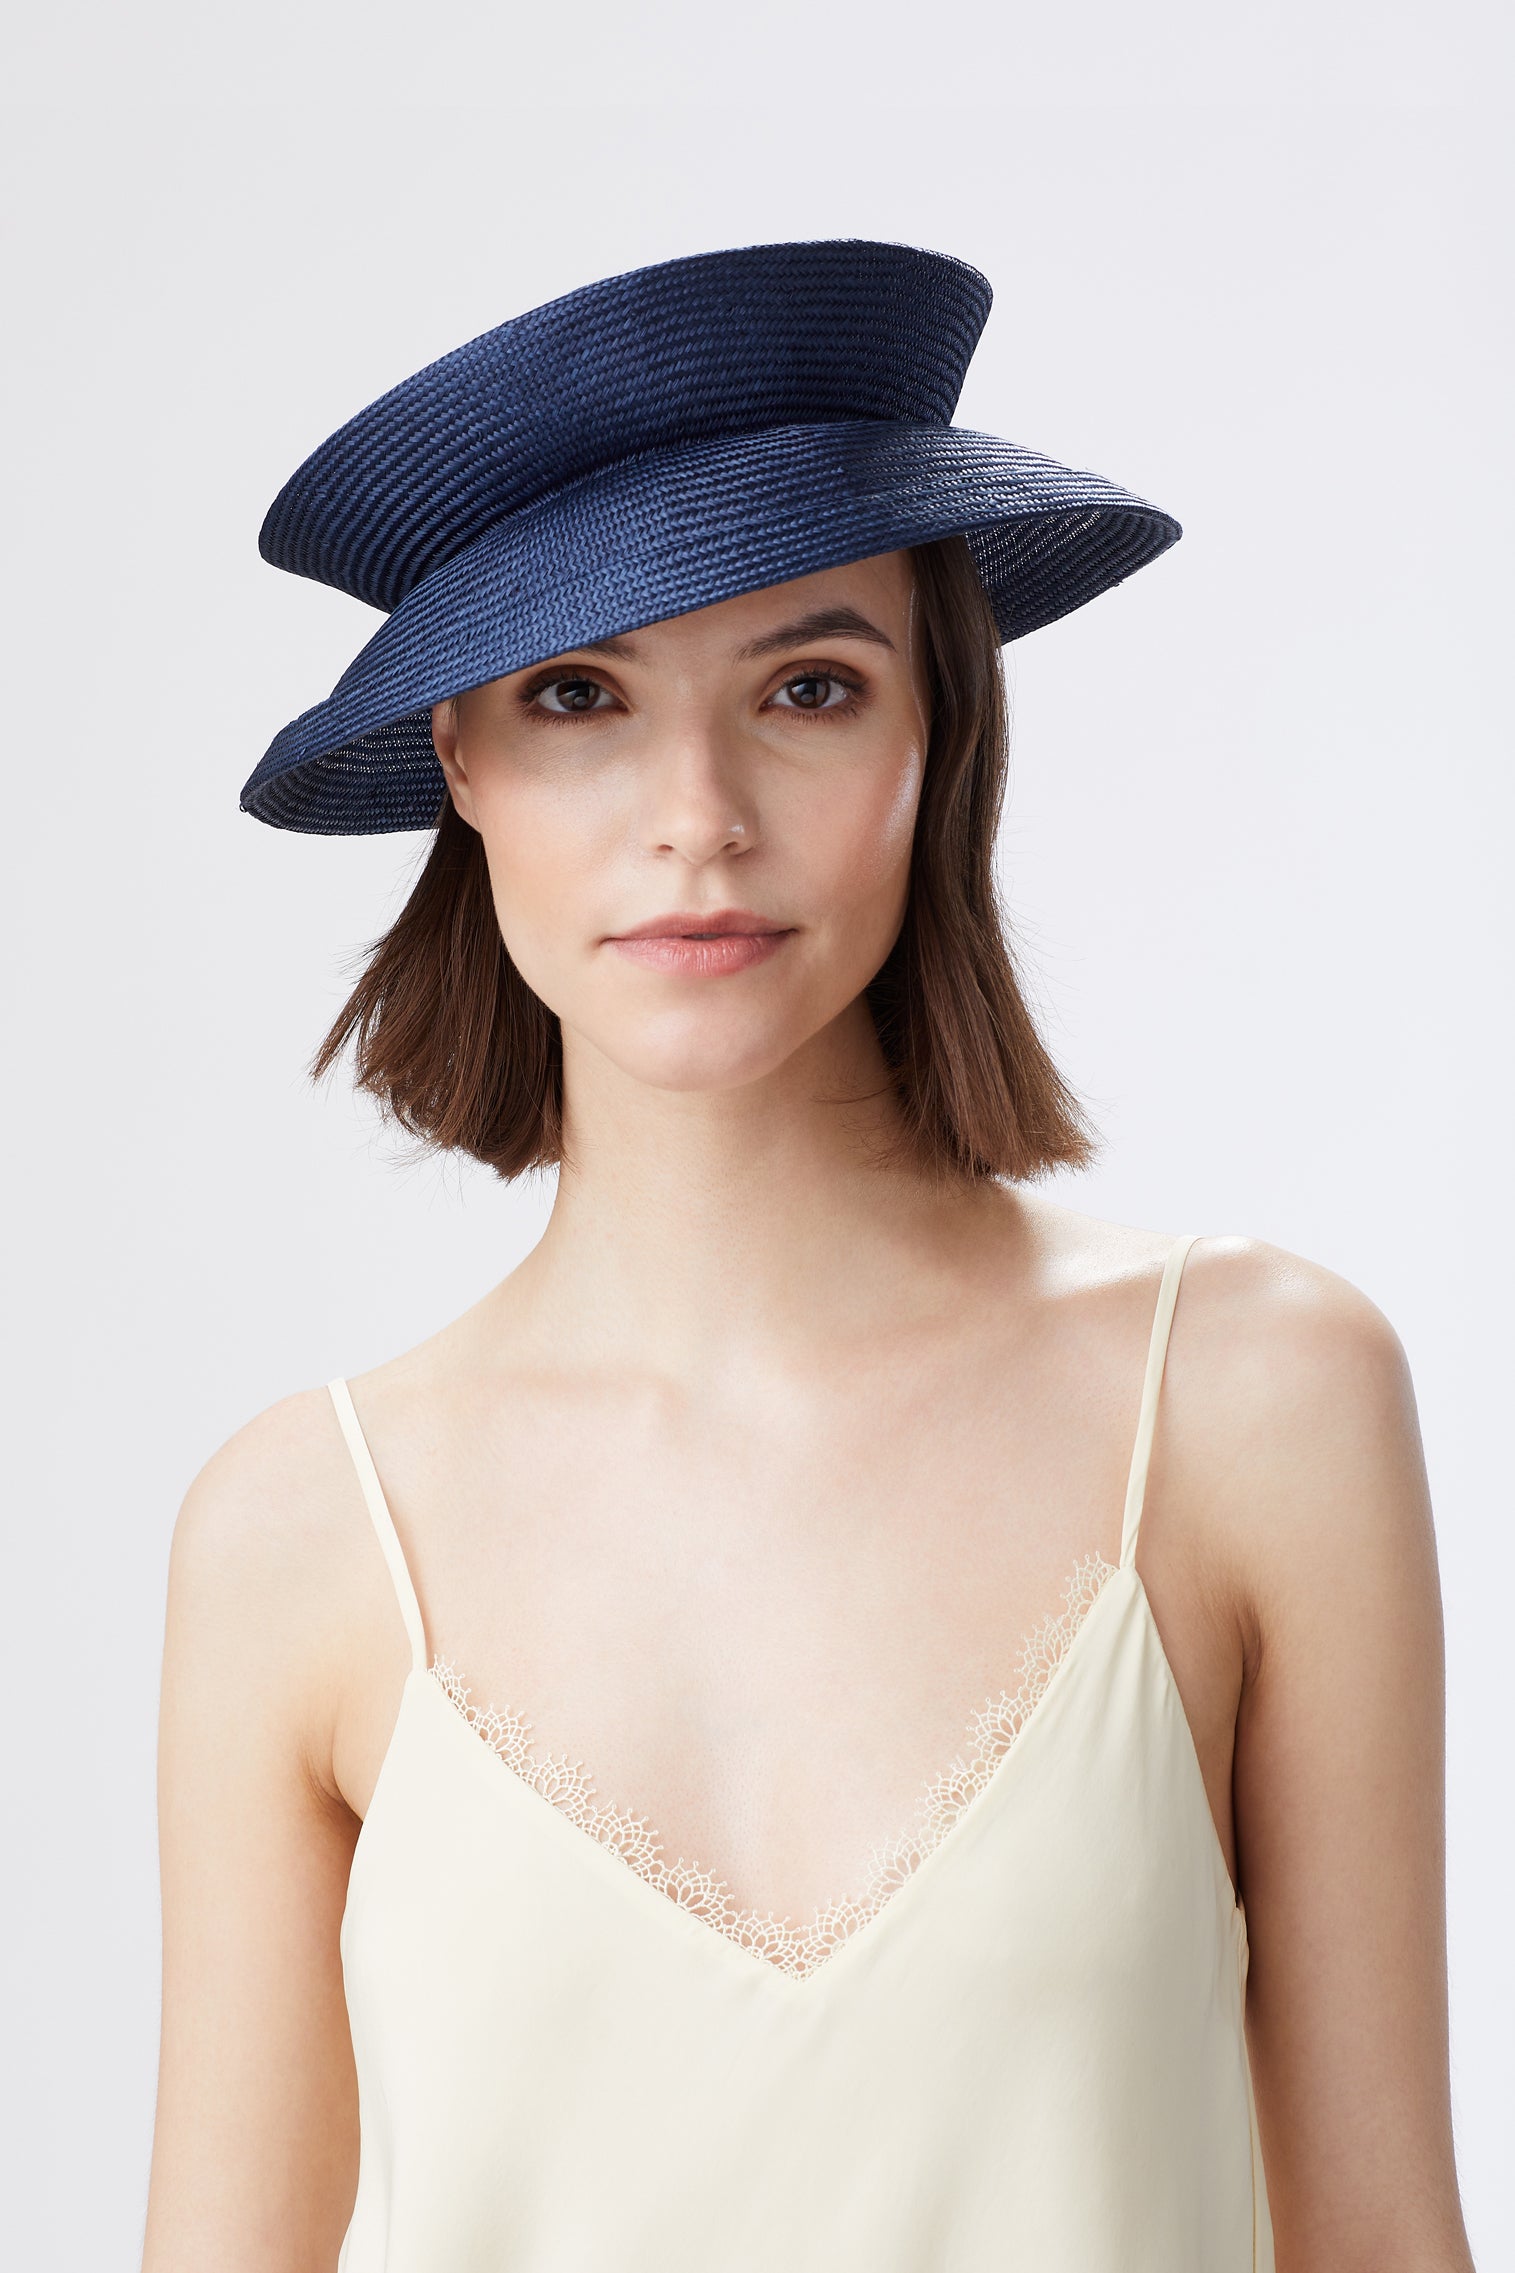 Pack'n'Go Collapsible Sun Hat - Panamas, Straw and Sun Hats for Women - Lock & Co. Hatters London UK